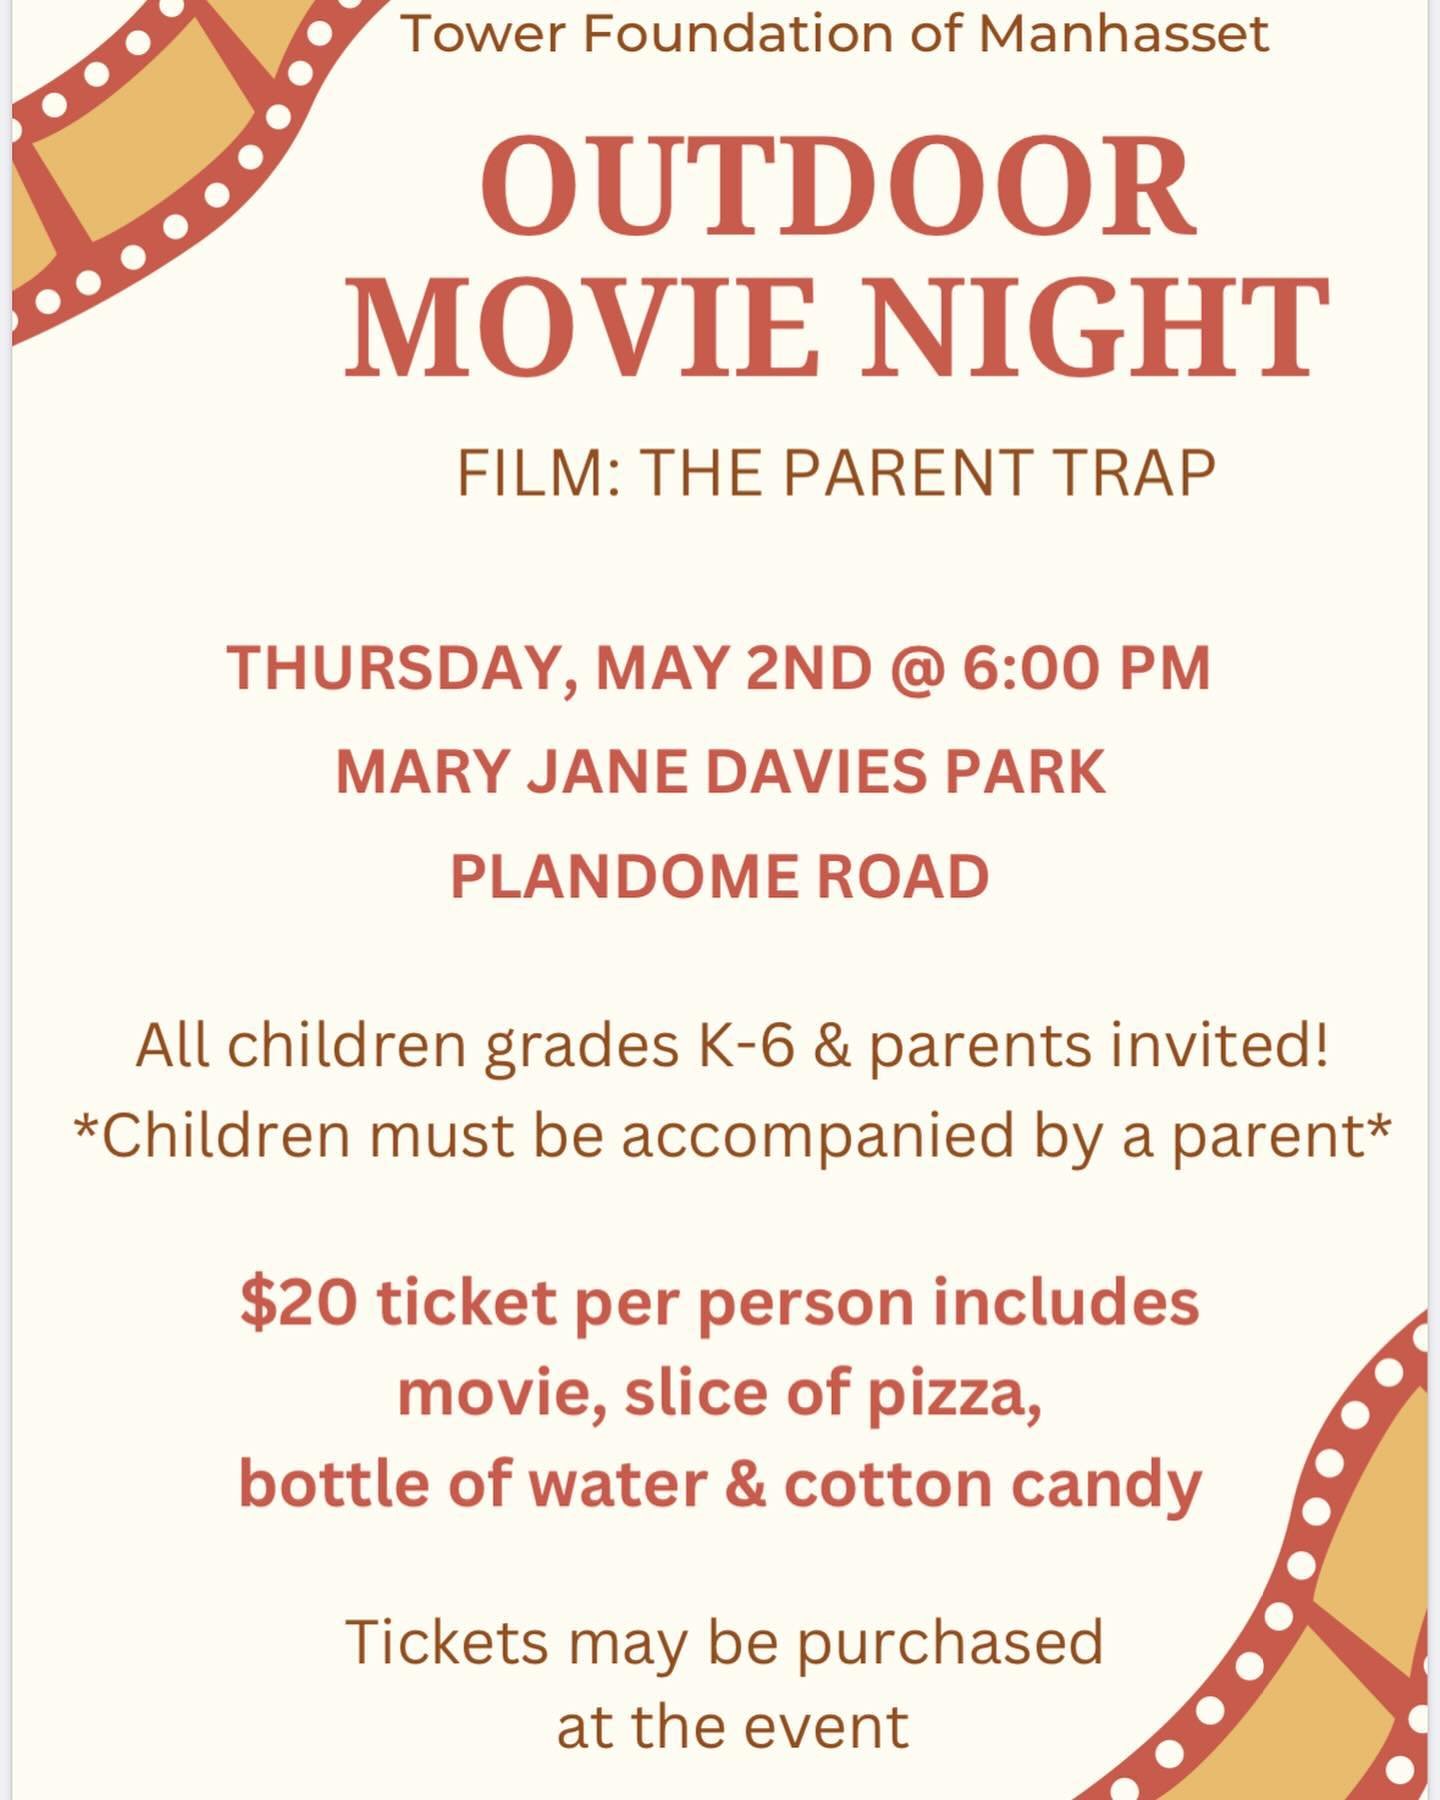 The Tower Foundation and Junior Tower Club will be hosting an outdoor movie night for students (K-6) on May 2. 

 

#towerfoundationofmanhasset #towerfoundationmanhasset #towerfoundationmanhassetny #manhassettowerfoundation #manhasset #manhassetny #m